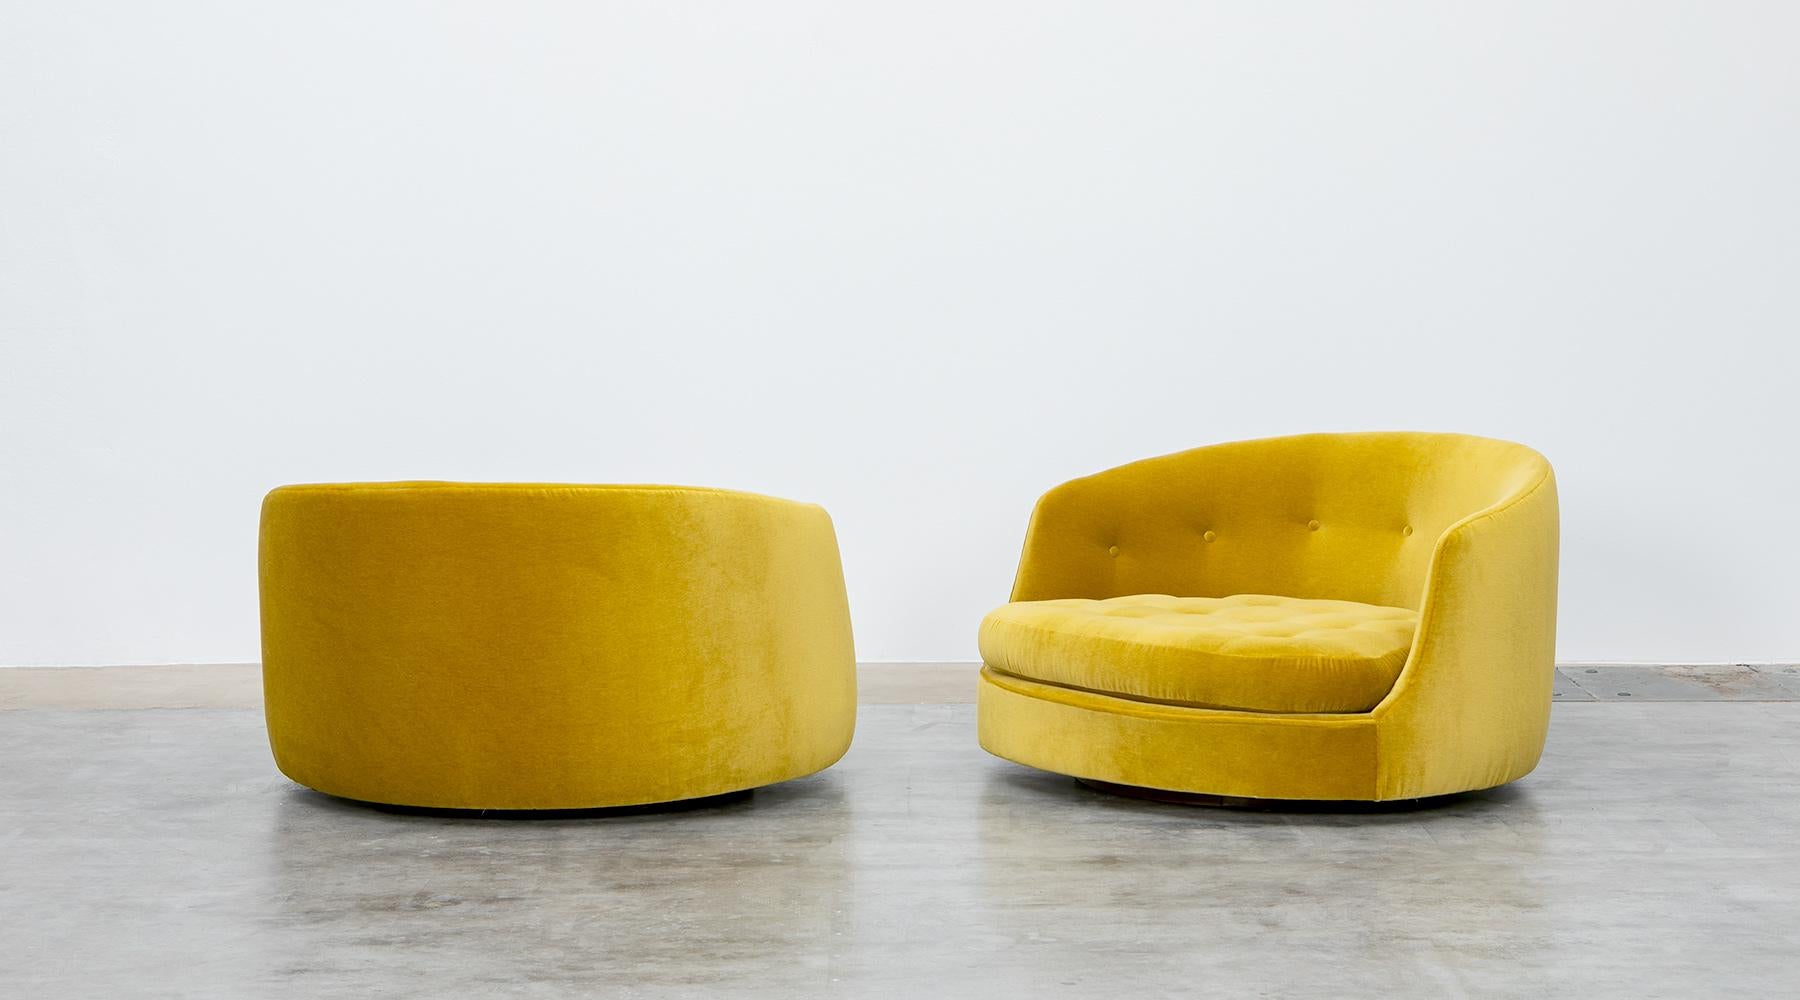 Pair of swivel lounge chairs, new upholstery (Creations Metaphores) by Milo Baughman, USA, 1970.

Inviting pair of matching swivel chairs by American modernist Milo Baughman. Its wide and organic shape is matched with a high-quality new upholstery